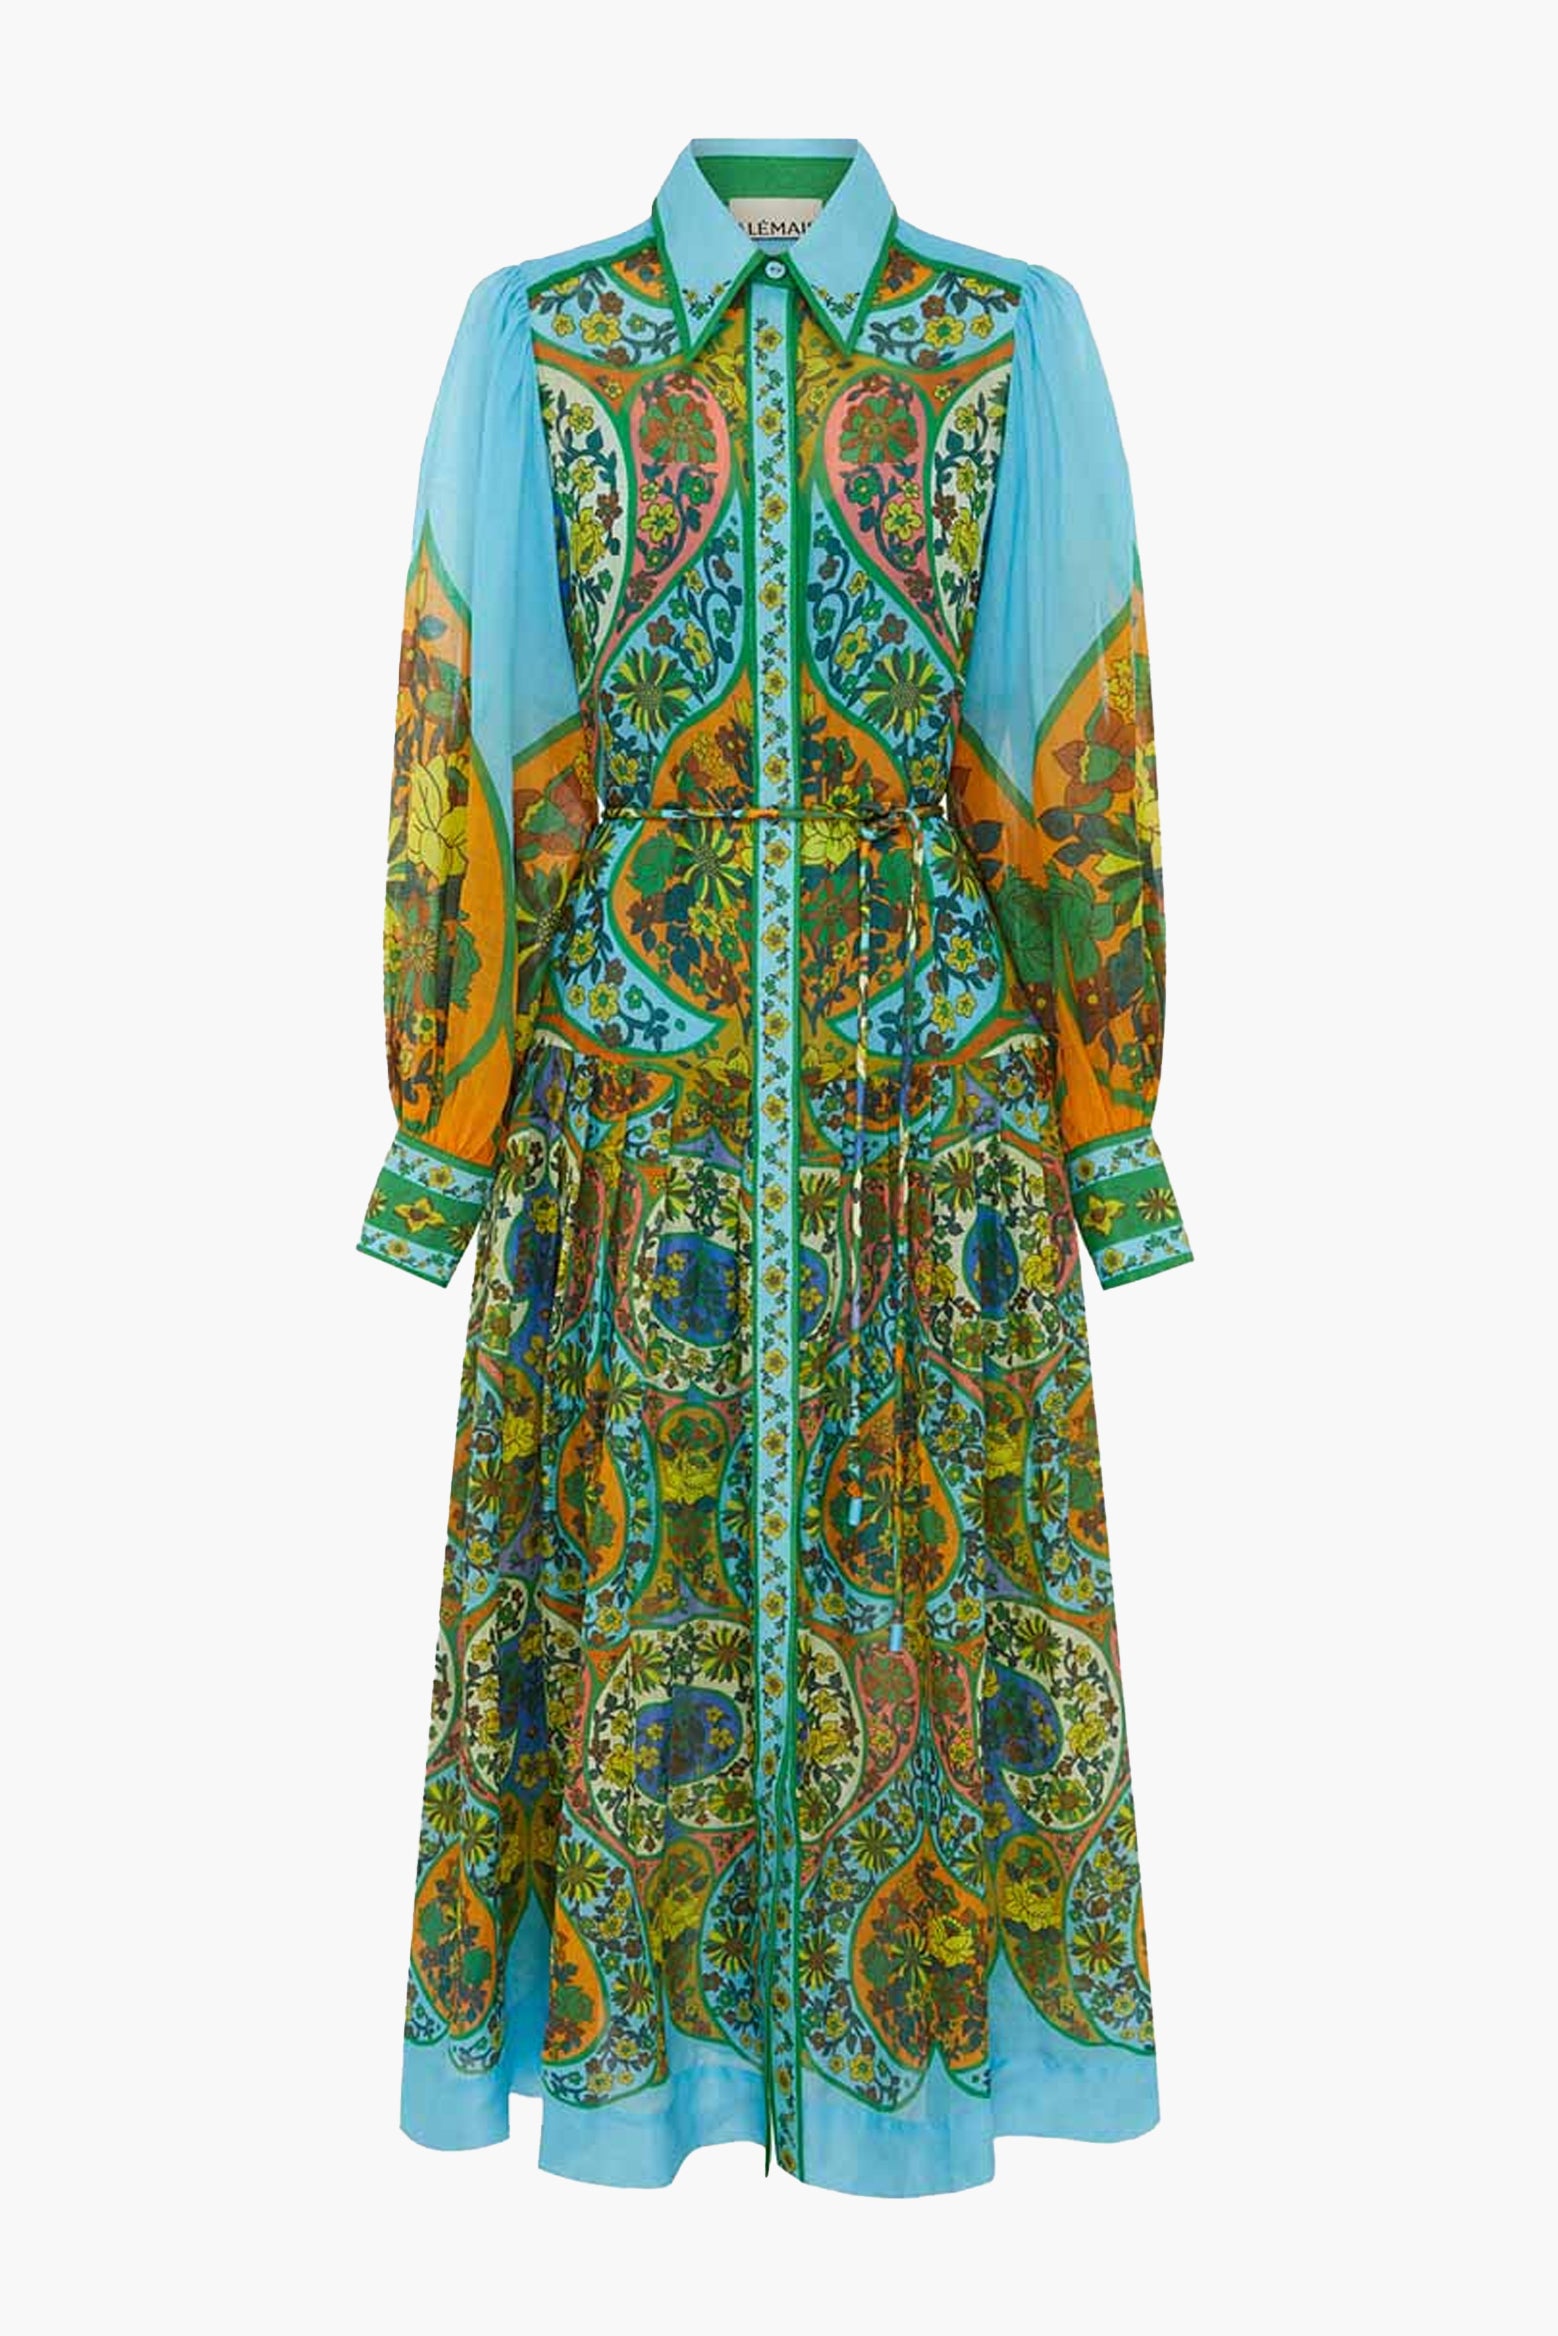 Alémais Sofie Shirtdress in Multi available at The New Trend Australia. 